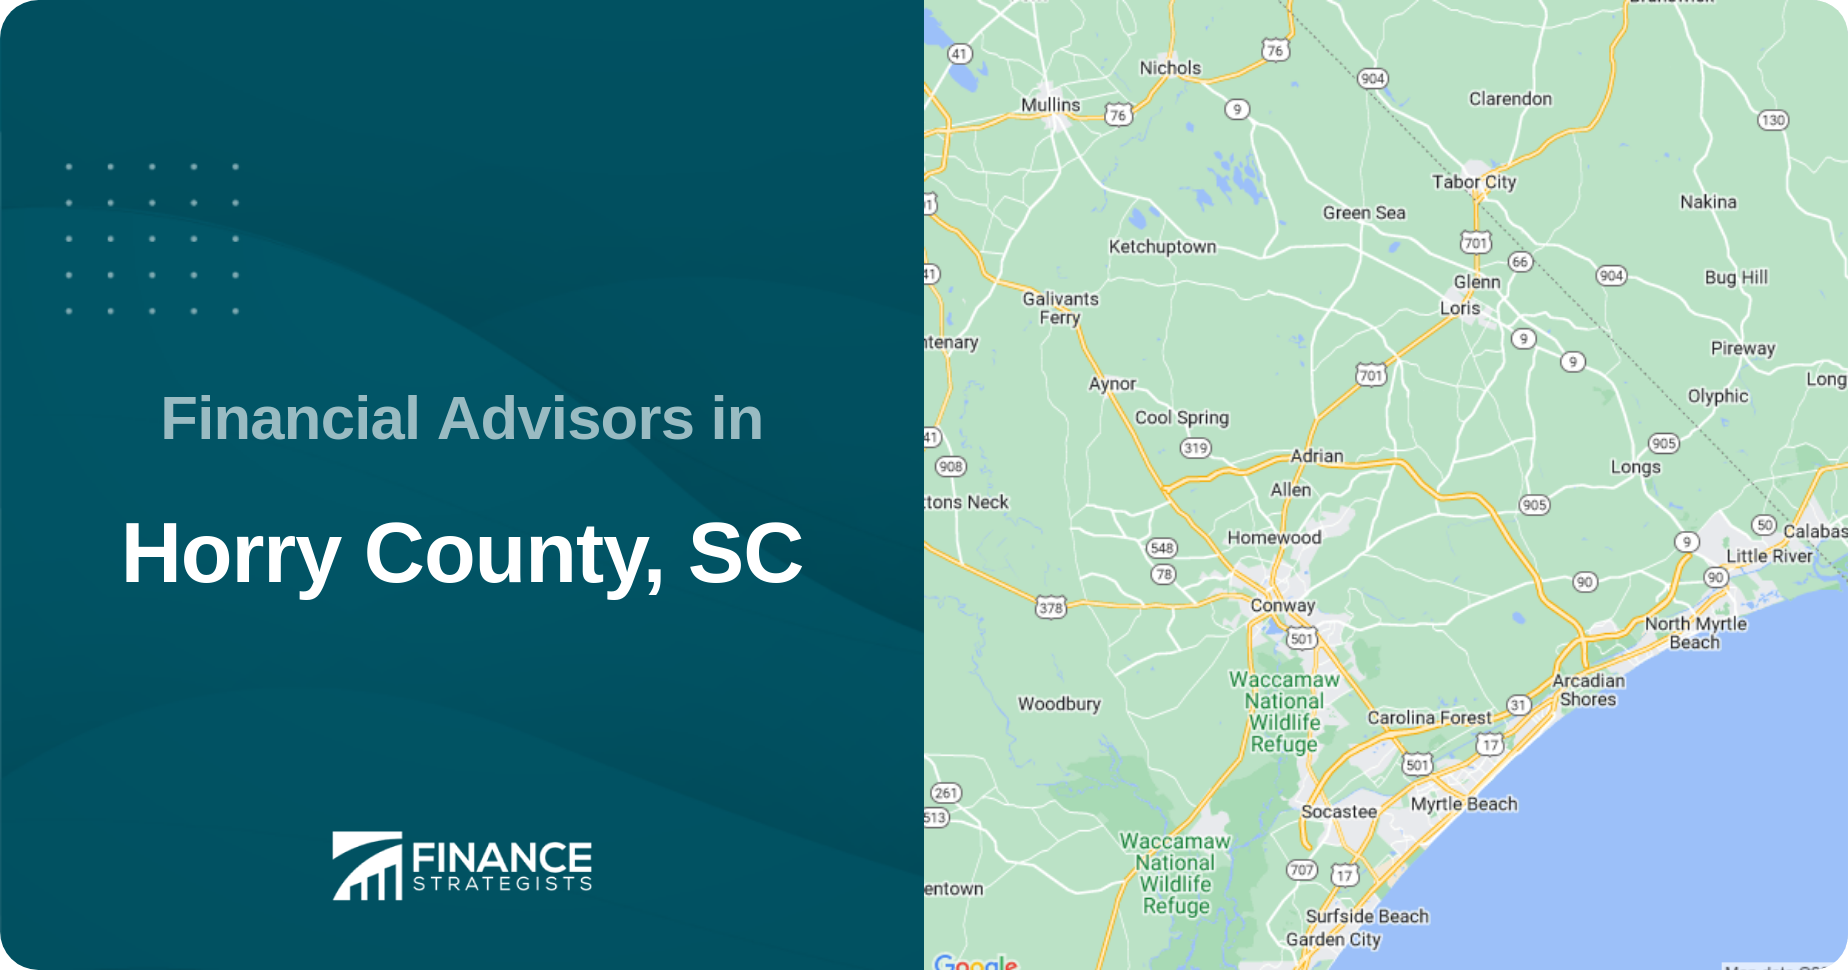 Financial Advisors in Horry County, SC